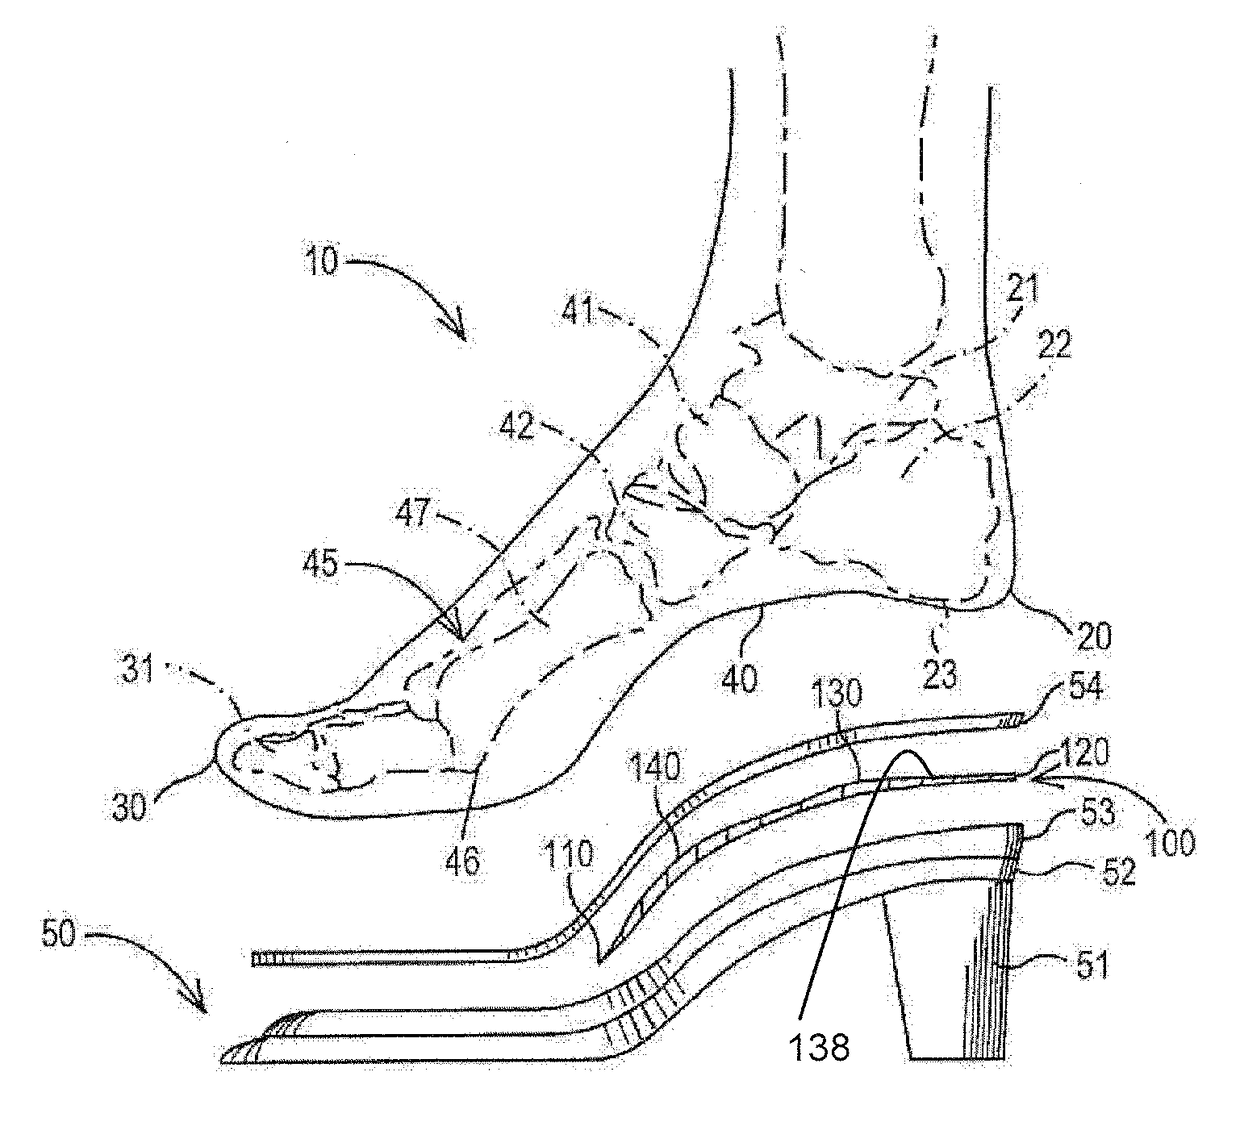 Device for high-heeled shoes and method of constructing a high-heeled shoe